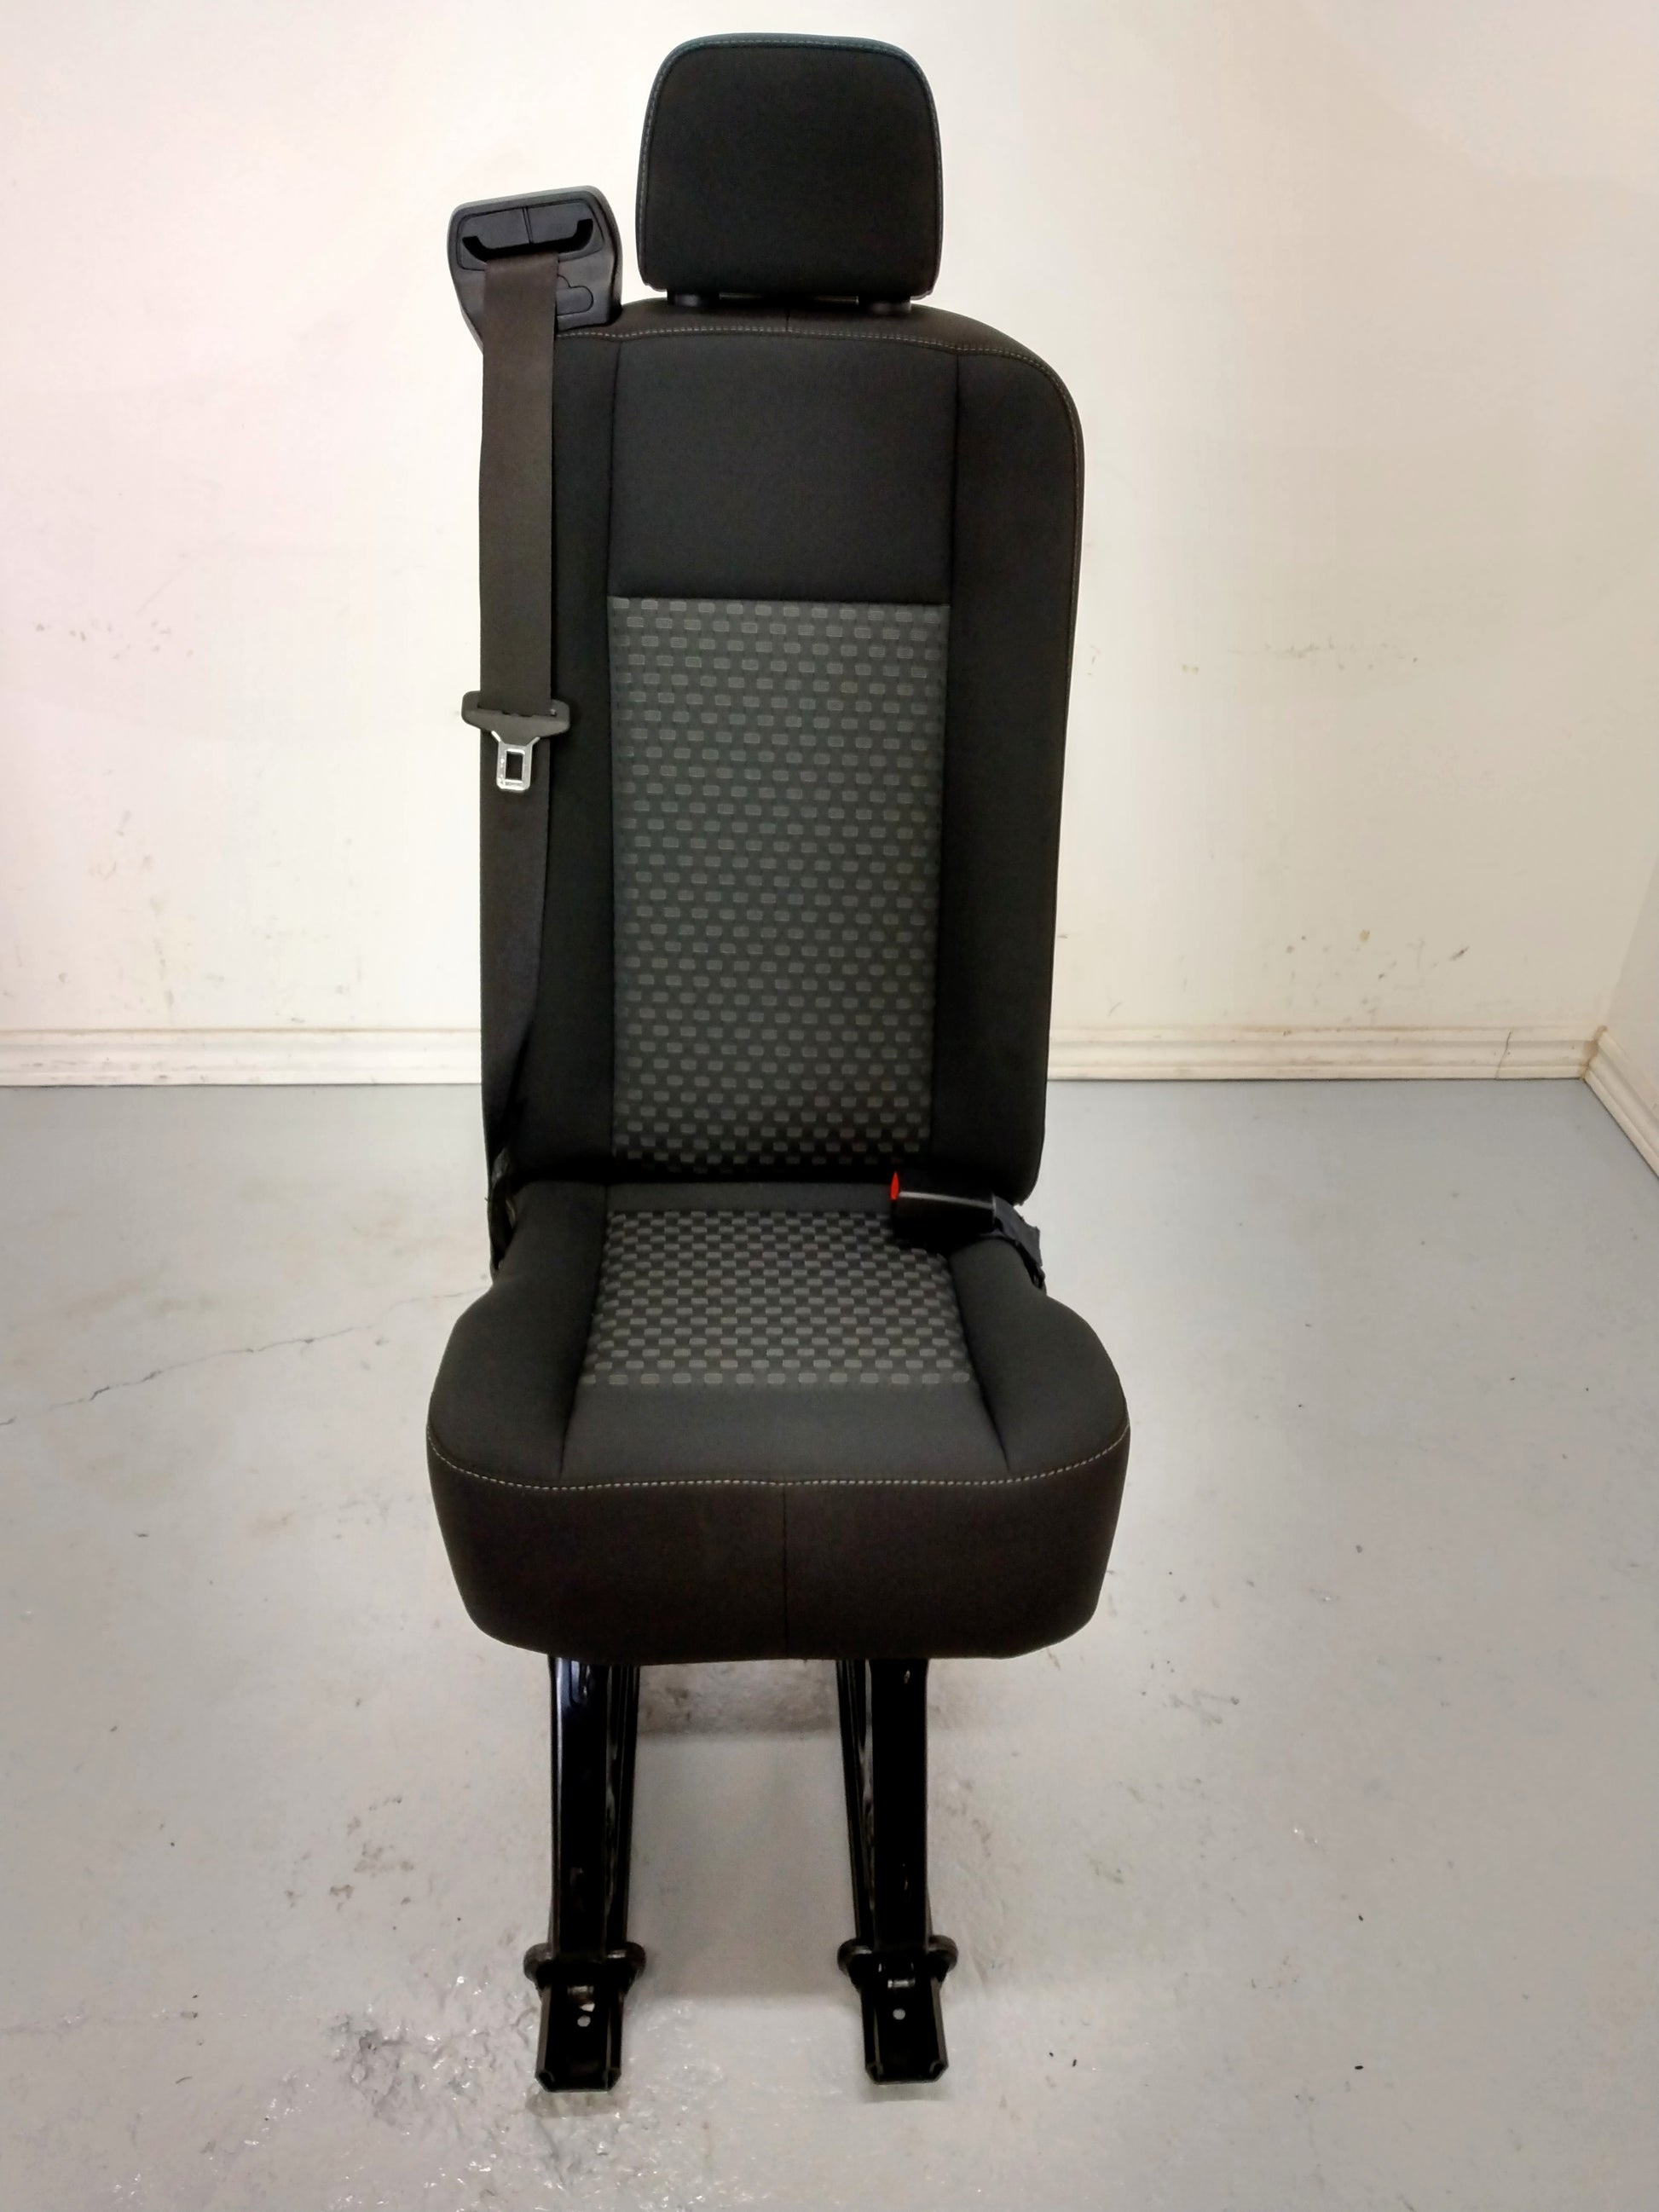 2020 FORD TRANSIT VAN single seat black cloth removeable quick release universal fit custom cargo